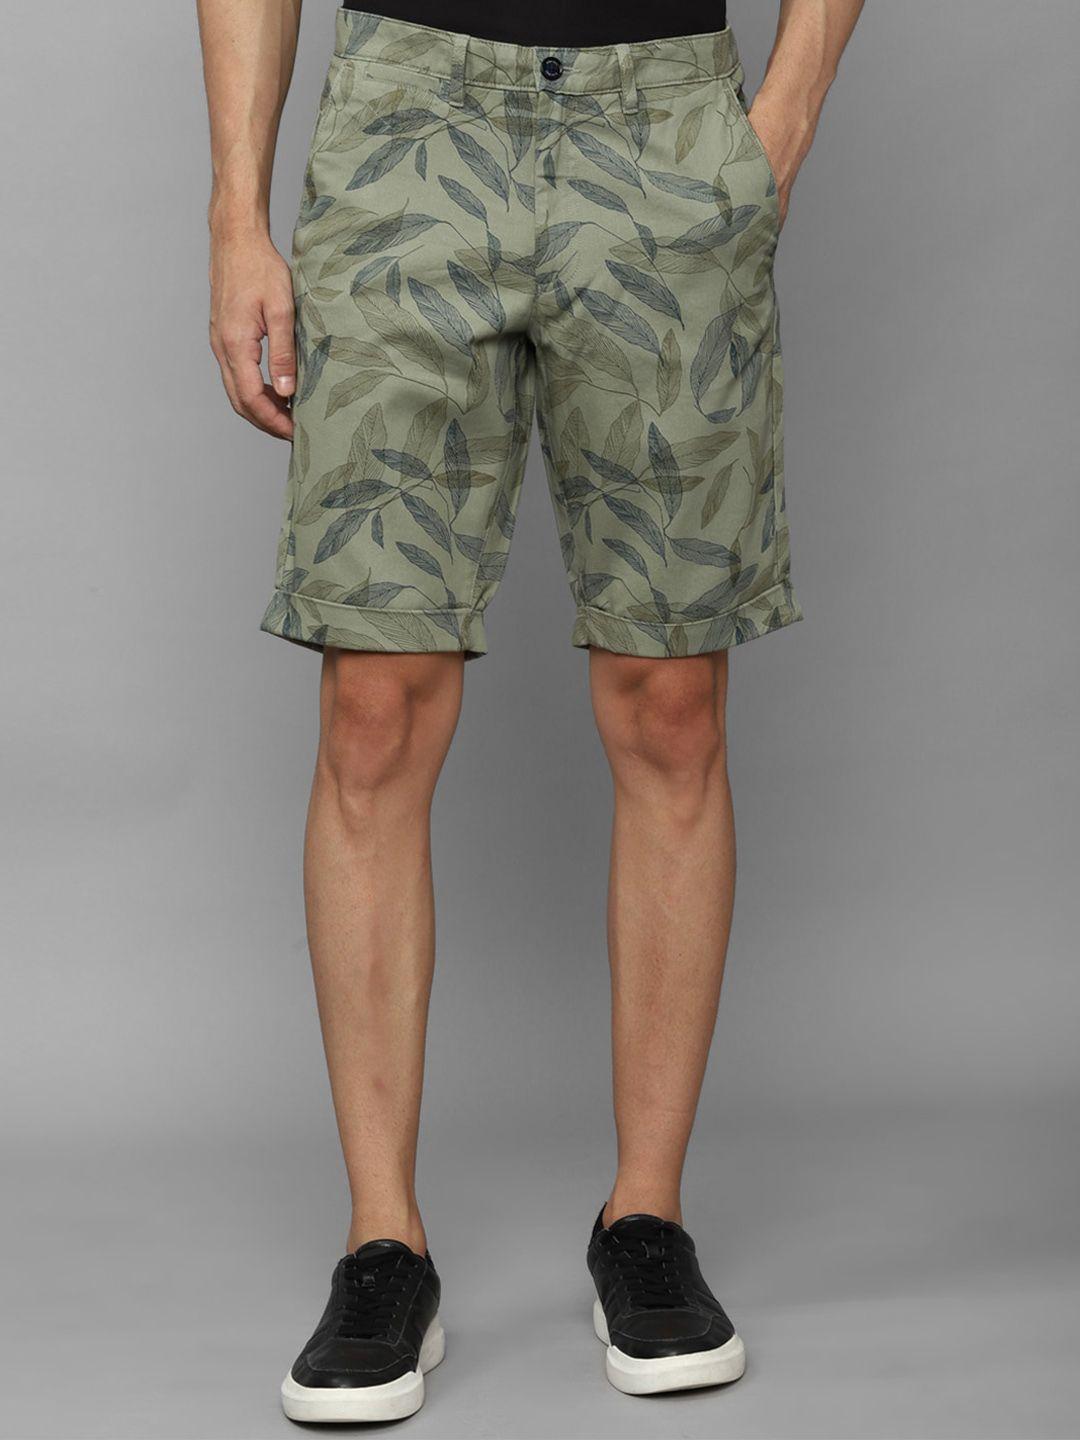 allen solly men tropical printed slim fit pure cotton chino shorts